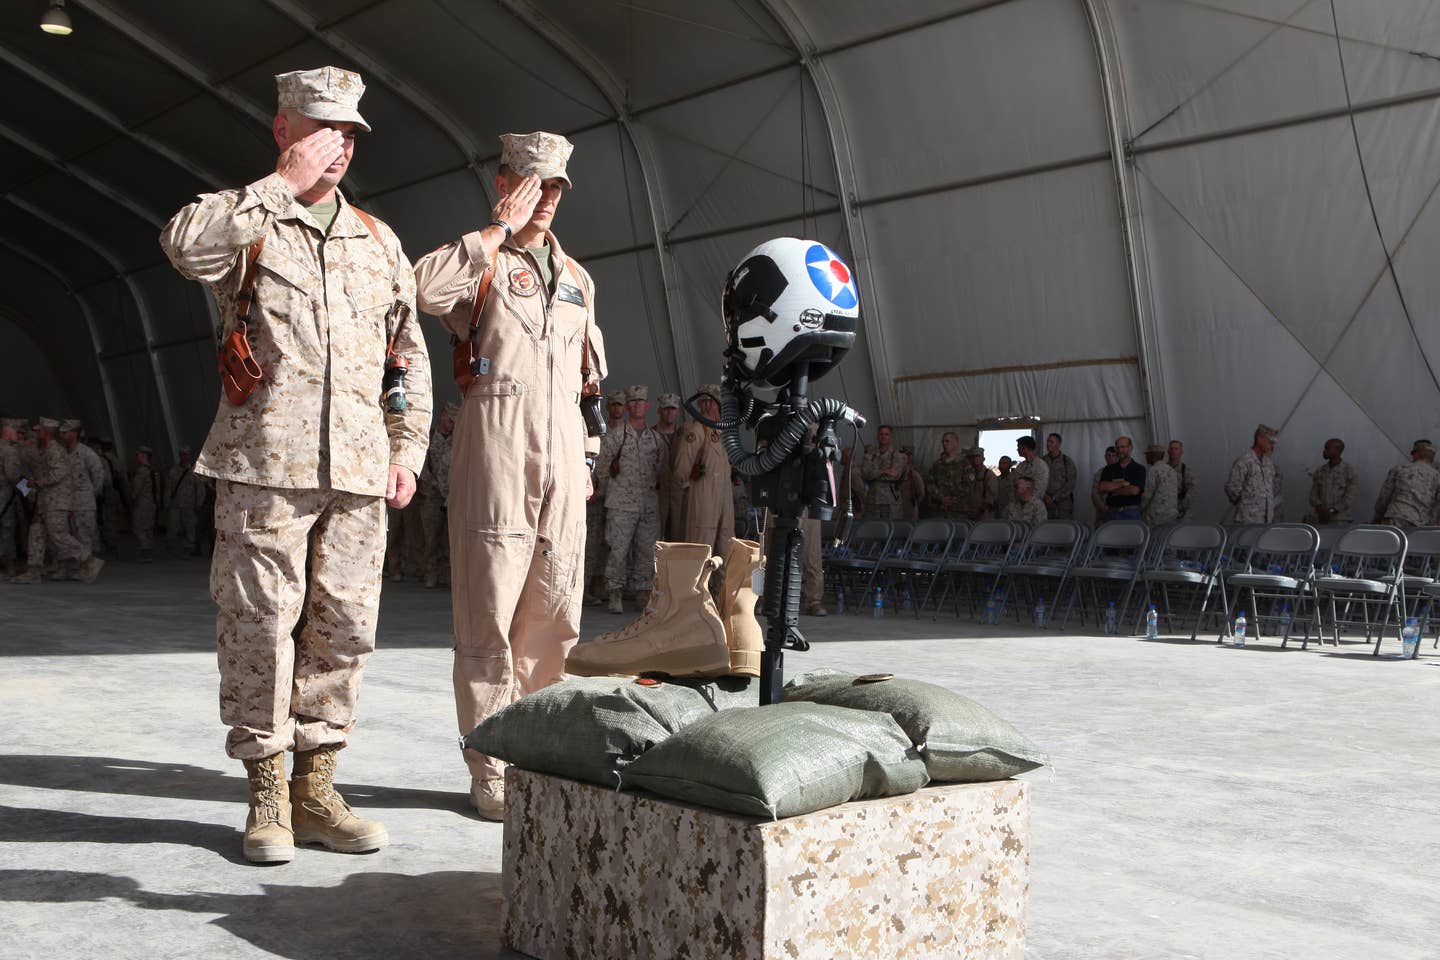 Lt. Col. Christopher Raible's memorial after the Camp Bastion assault